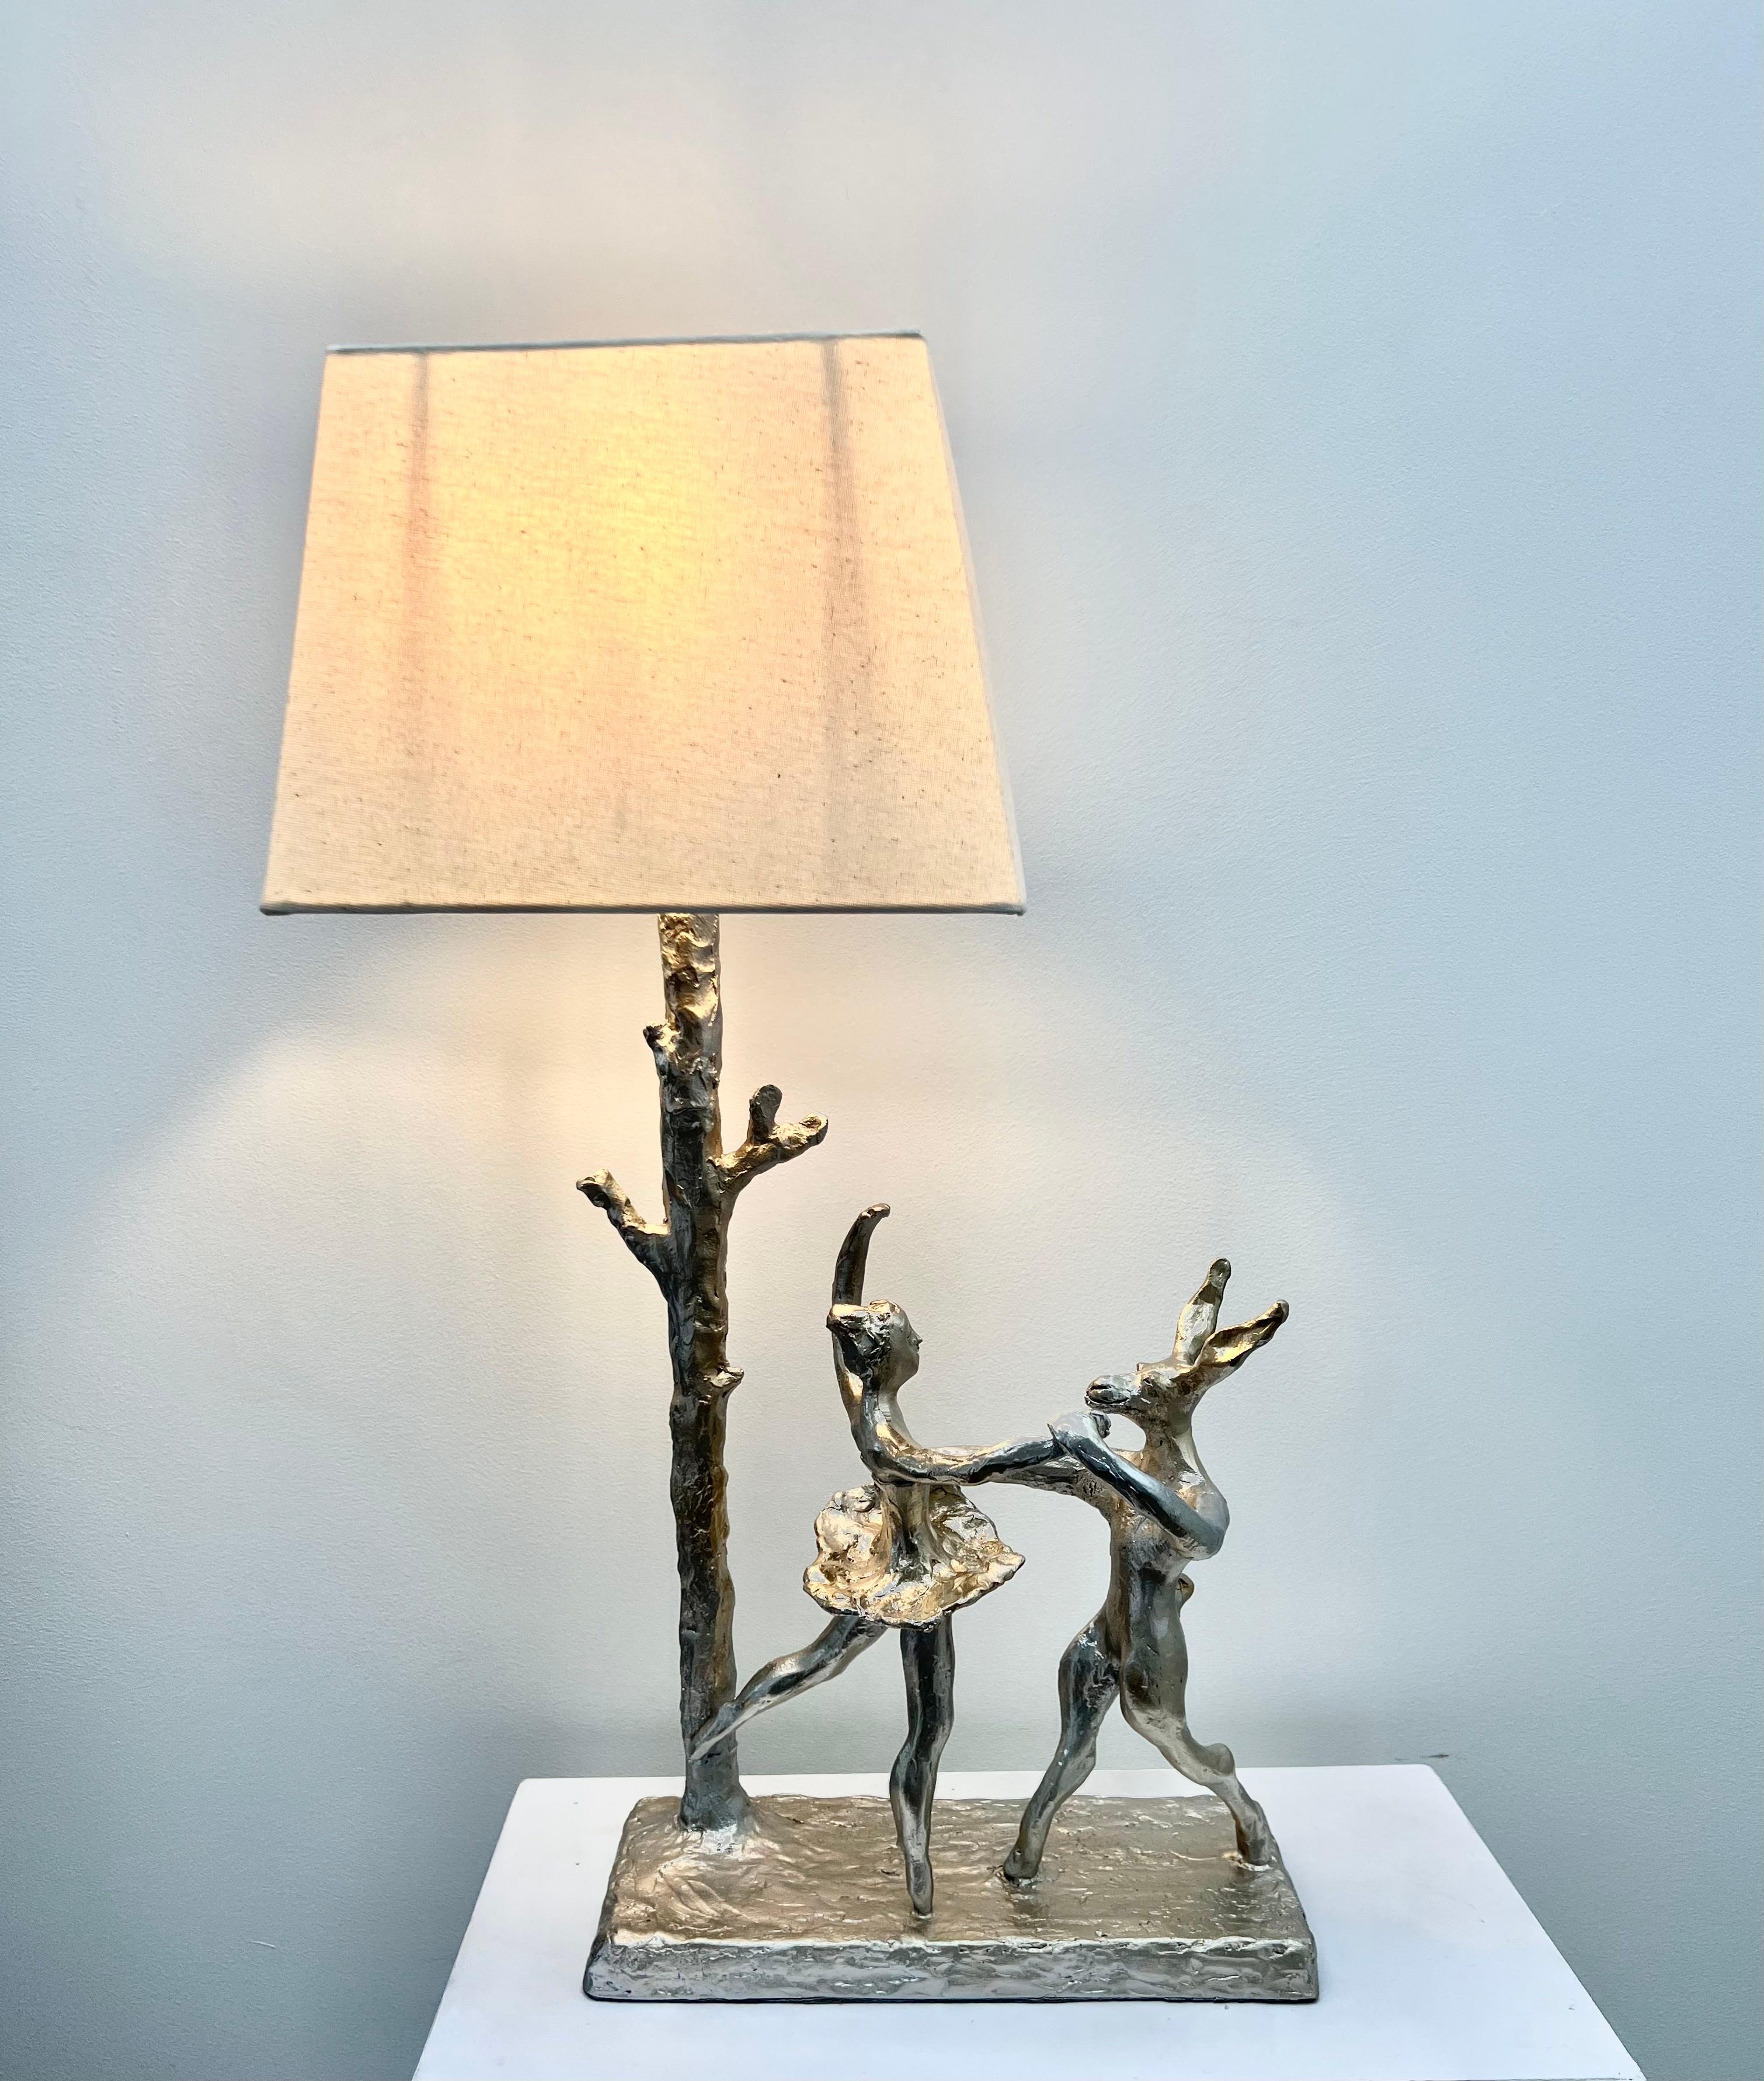 A  sculptural table lamp of a  hare gracefully dancing with a ballet dancer, posing by a tree trunk.  A charming functional artwork, hand crafted, moulded and cast in a lighter resin.  All parts are individually crafted, cast and assembled and each